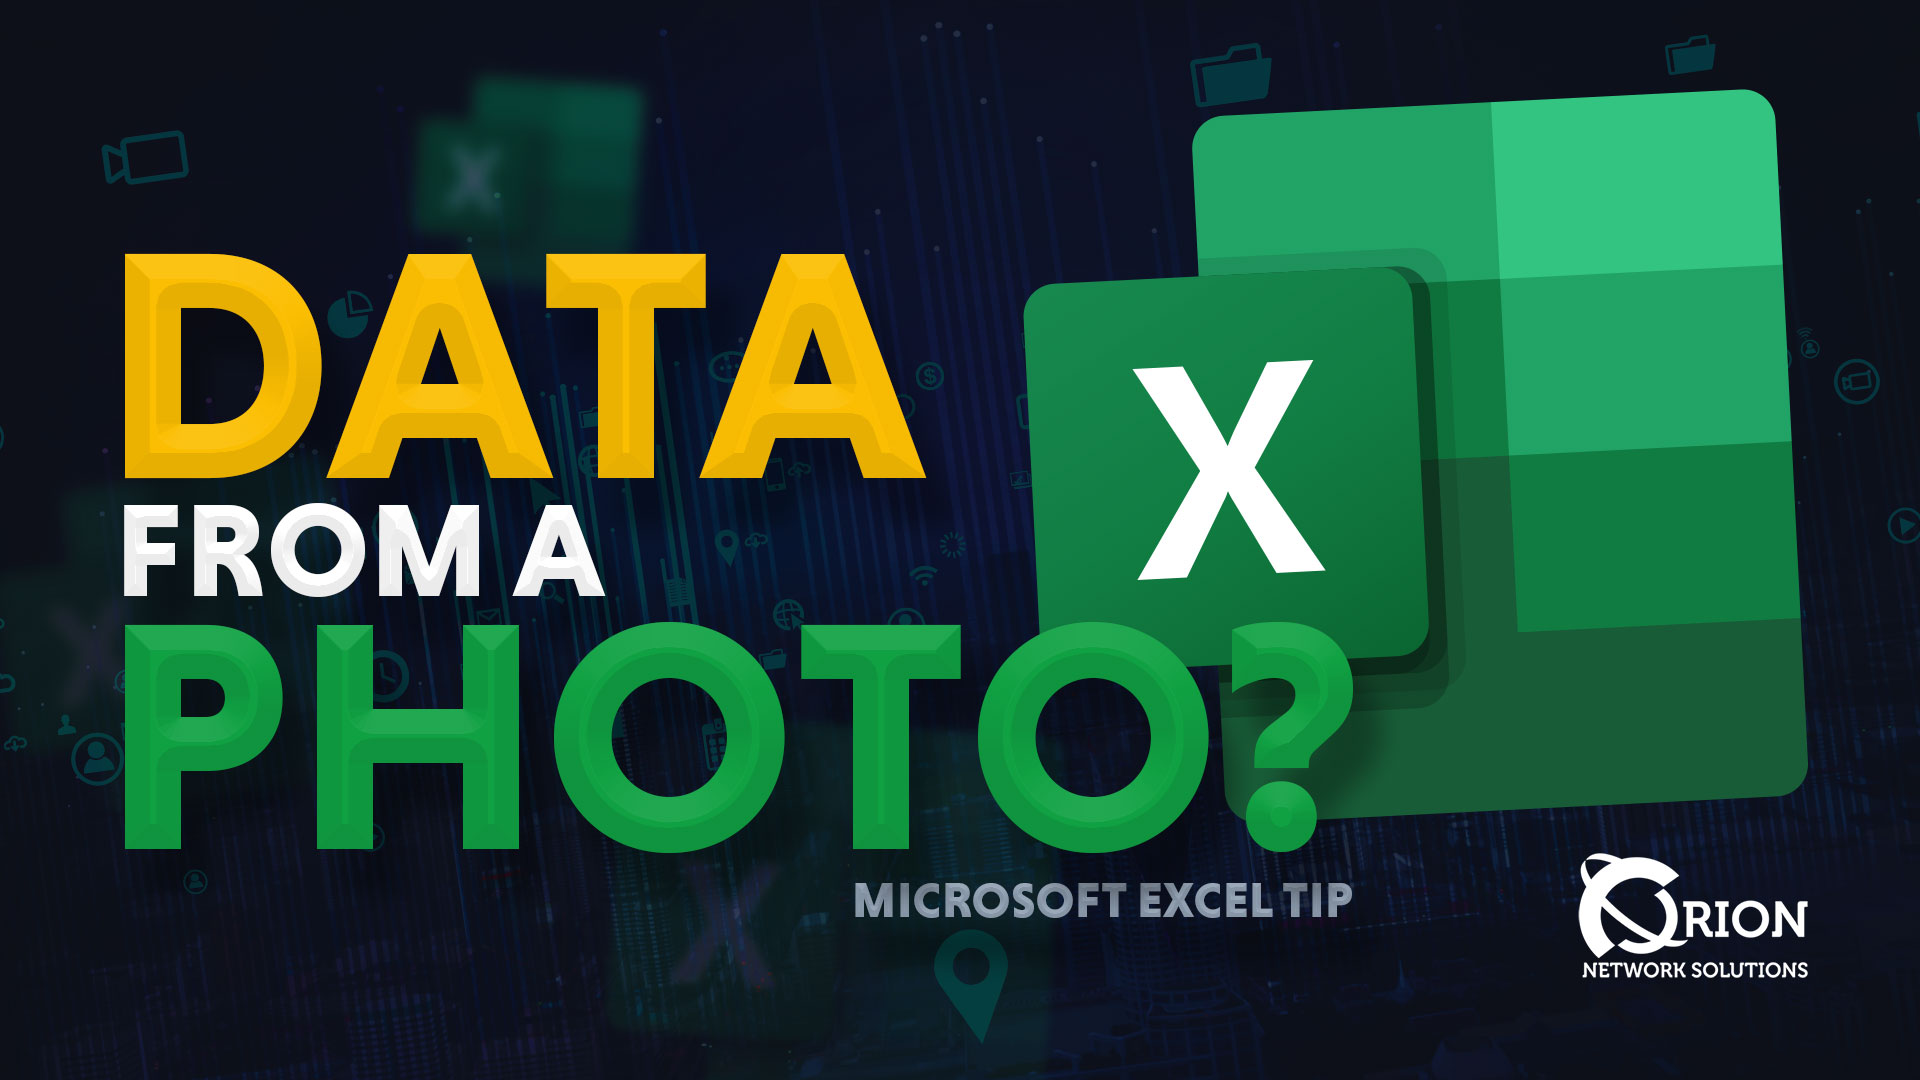 How To Import Excel Data From An Image